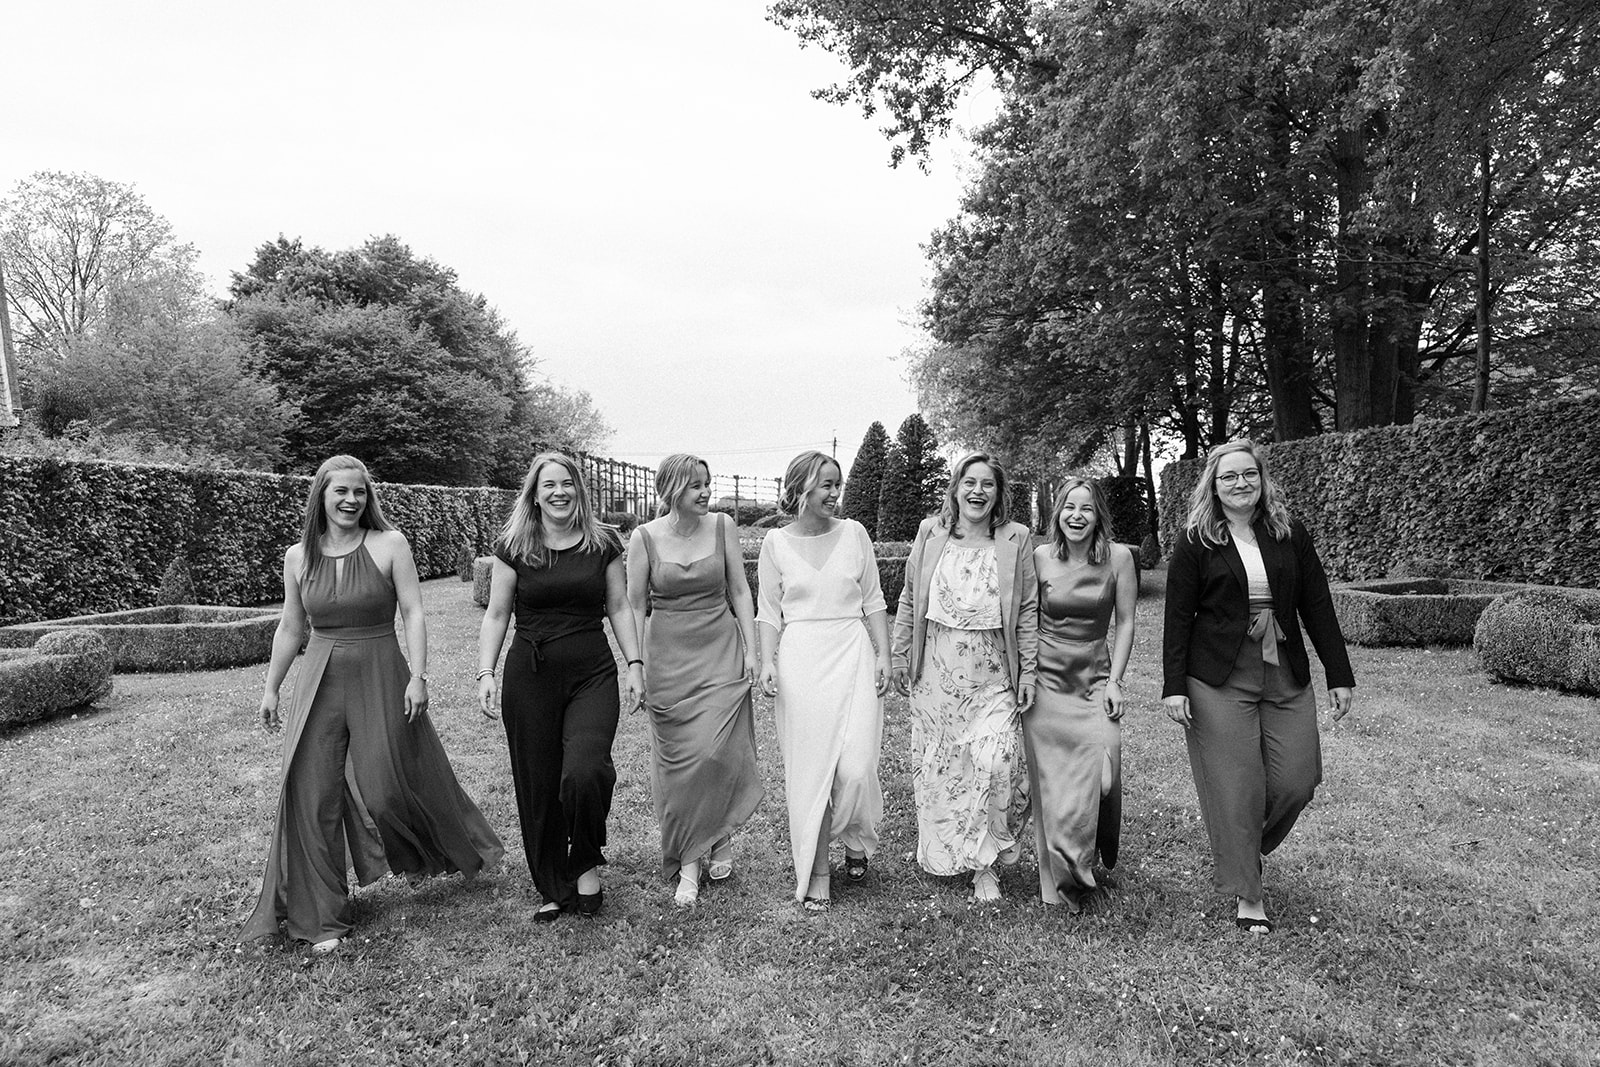 Stylish bridal party attire in line with the minimalist theme